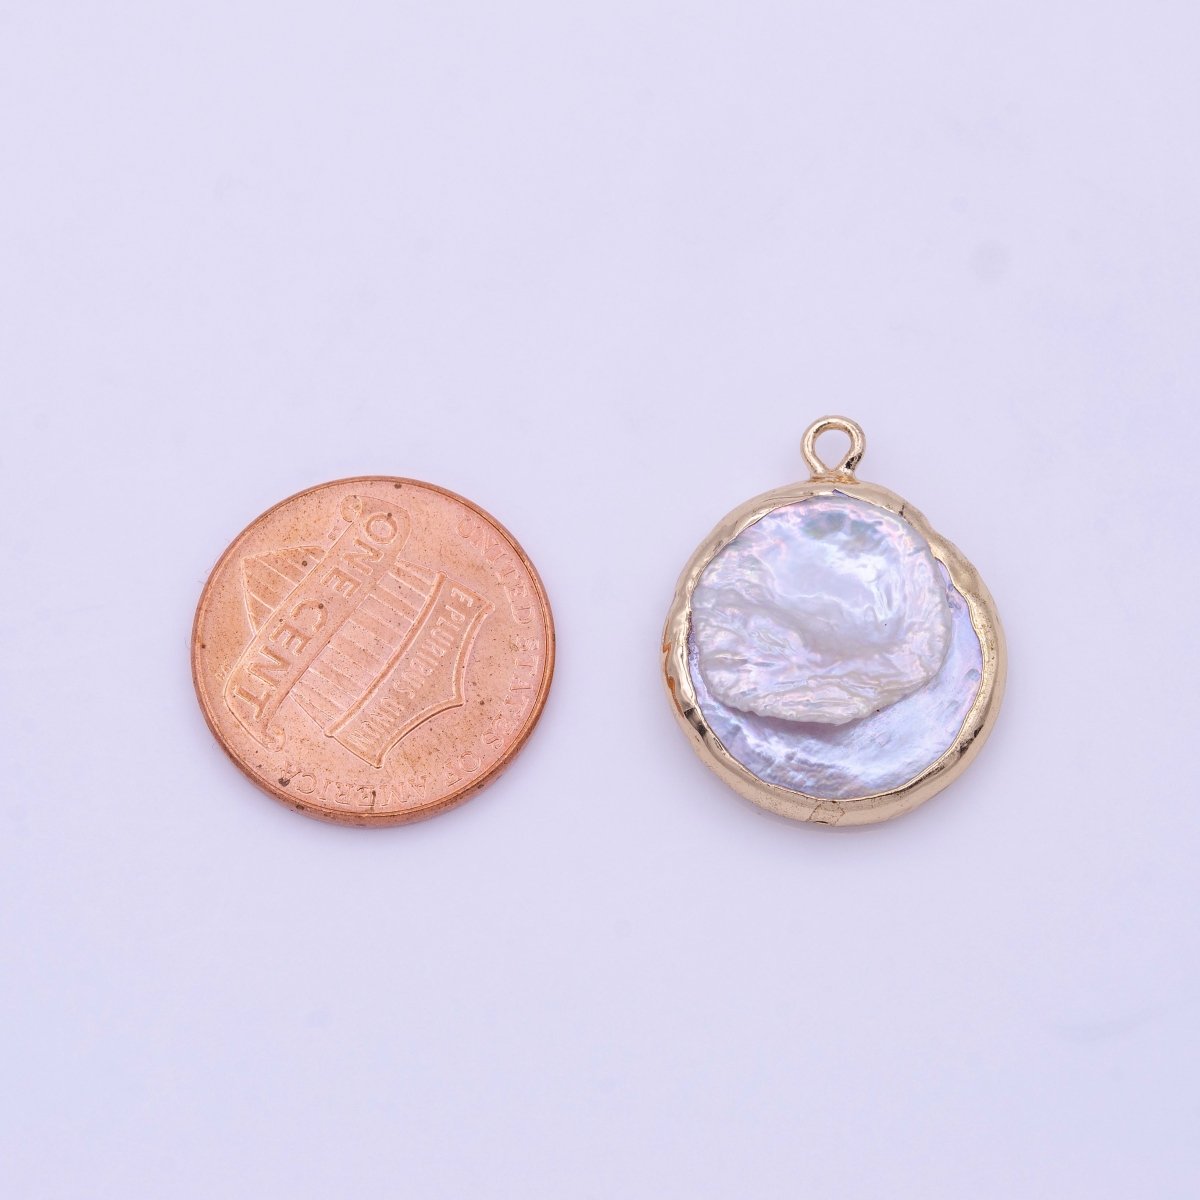 1 Piece Natural Pearl Gold bezel connector approx. 18mm round shape gold plated Charm Pendant P-1844 - DLUXCA